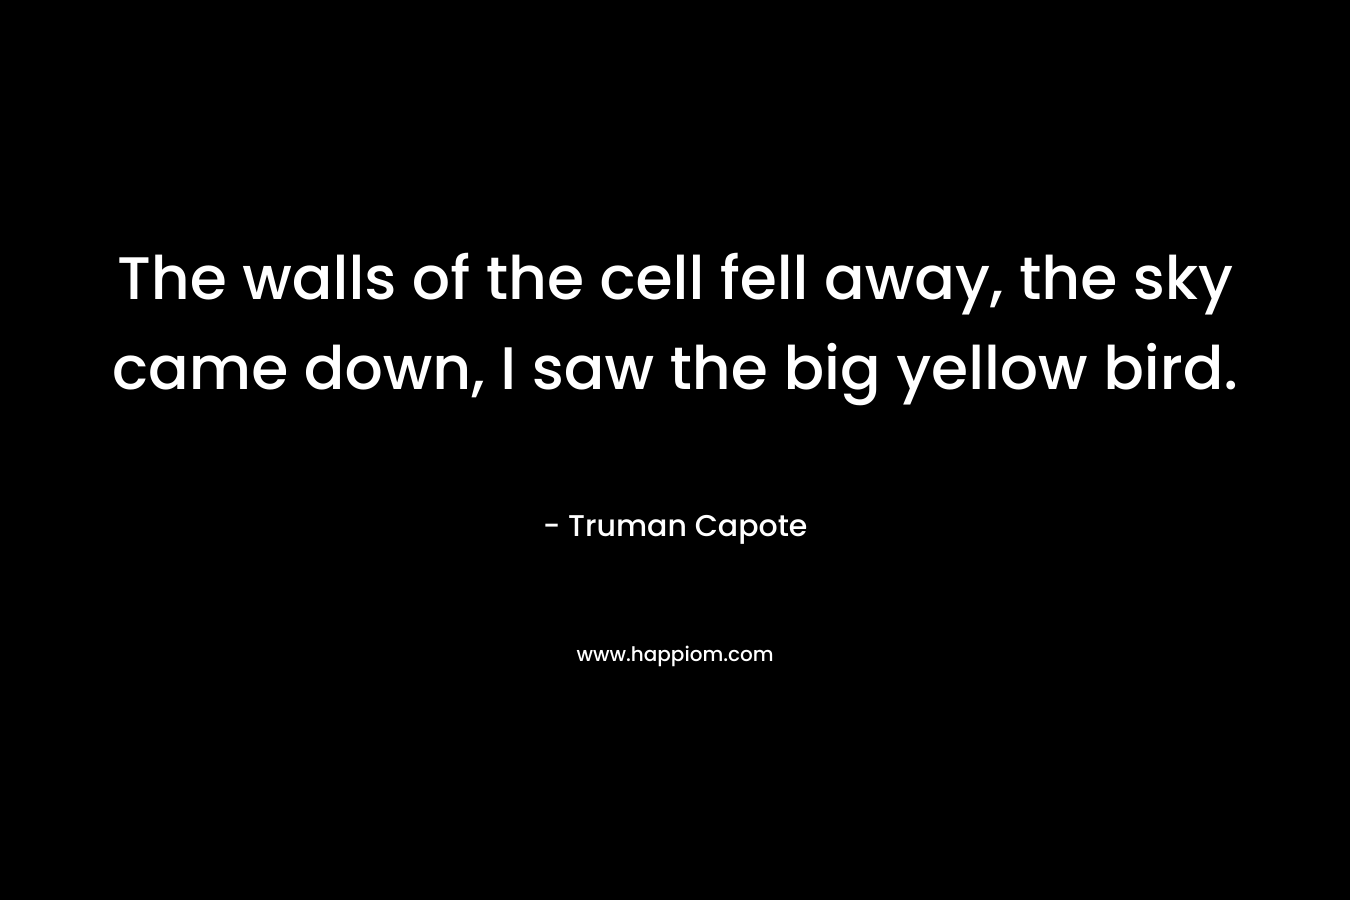 The walls of the cell fell away, the sky came down, I saw the big yellow bird. – Truman Capote